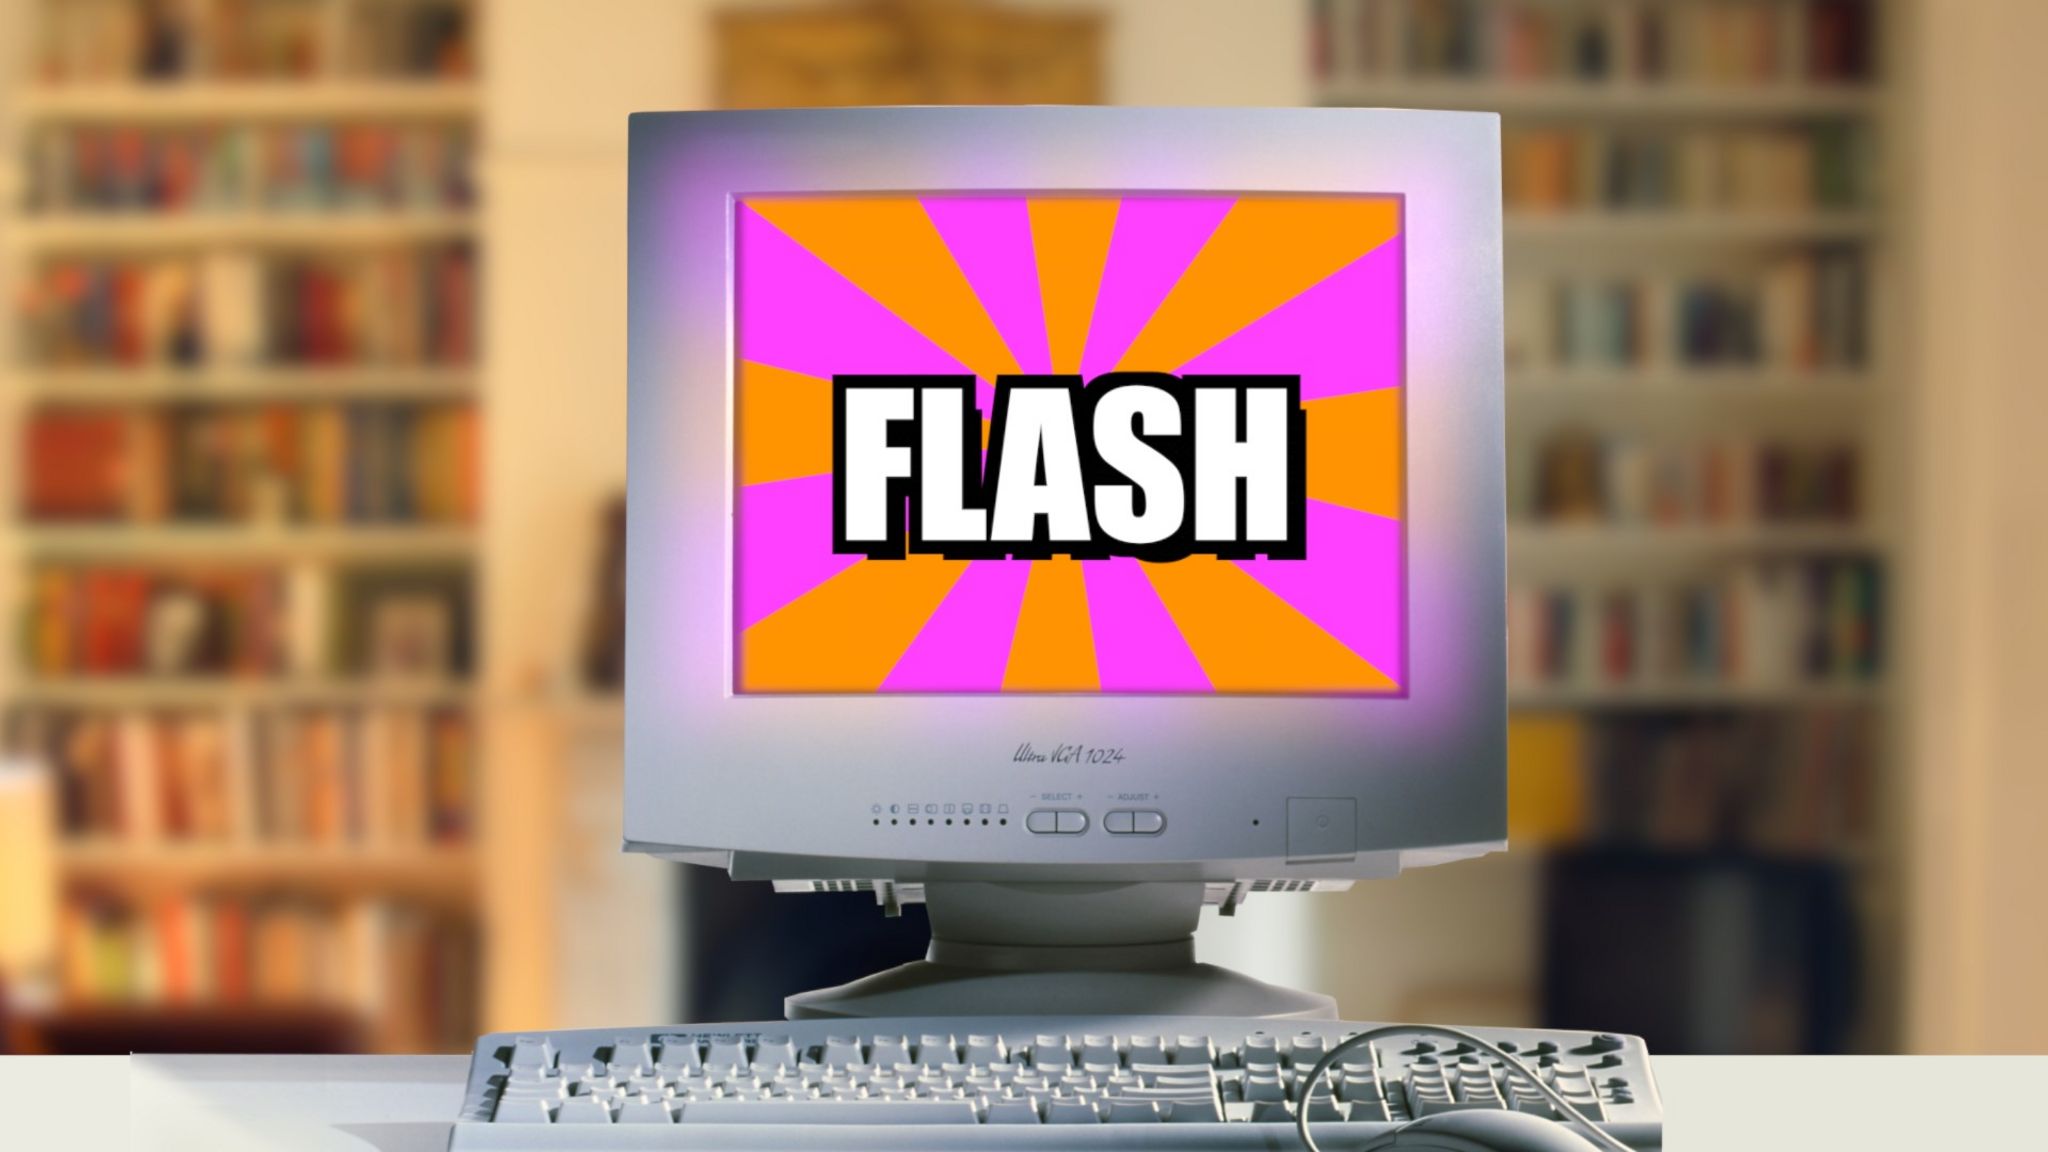 Computer showing a Flash video